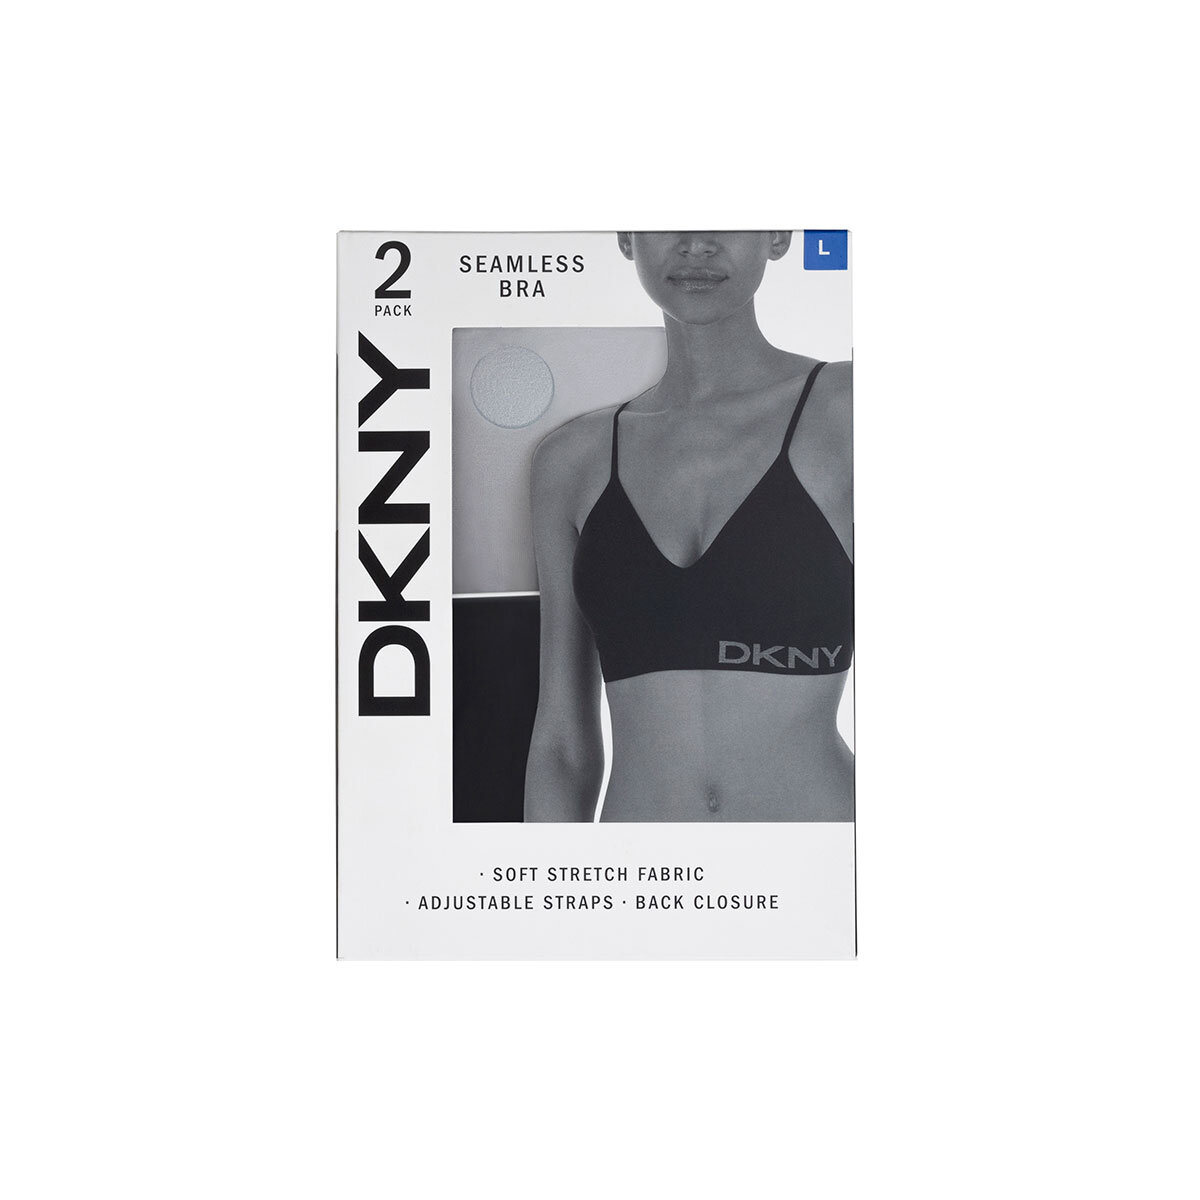 DKNY Women's Seamless Bralette, 2 Pack in 2 Colours and 3...